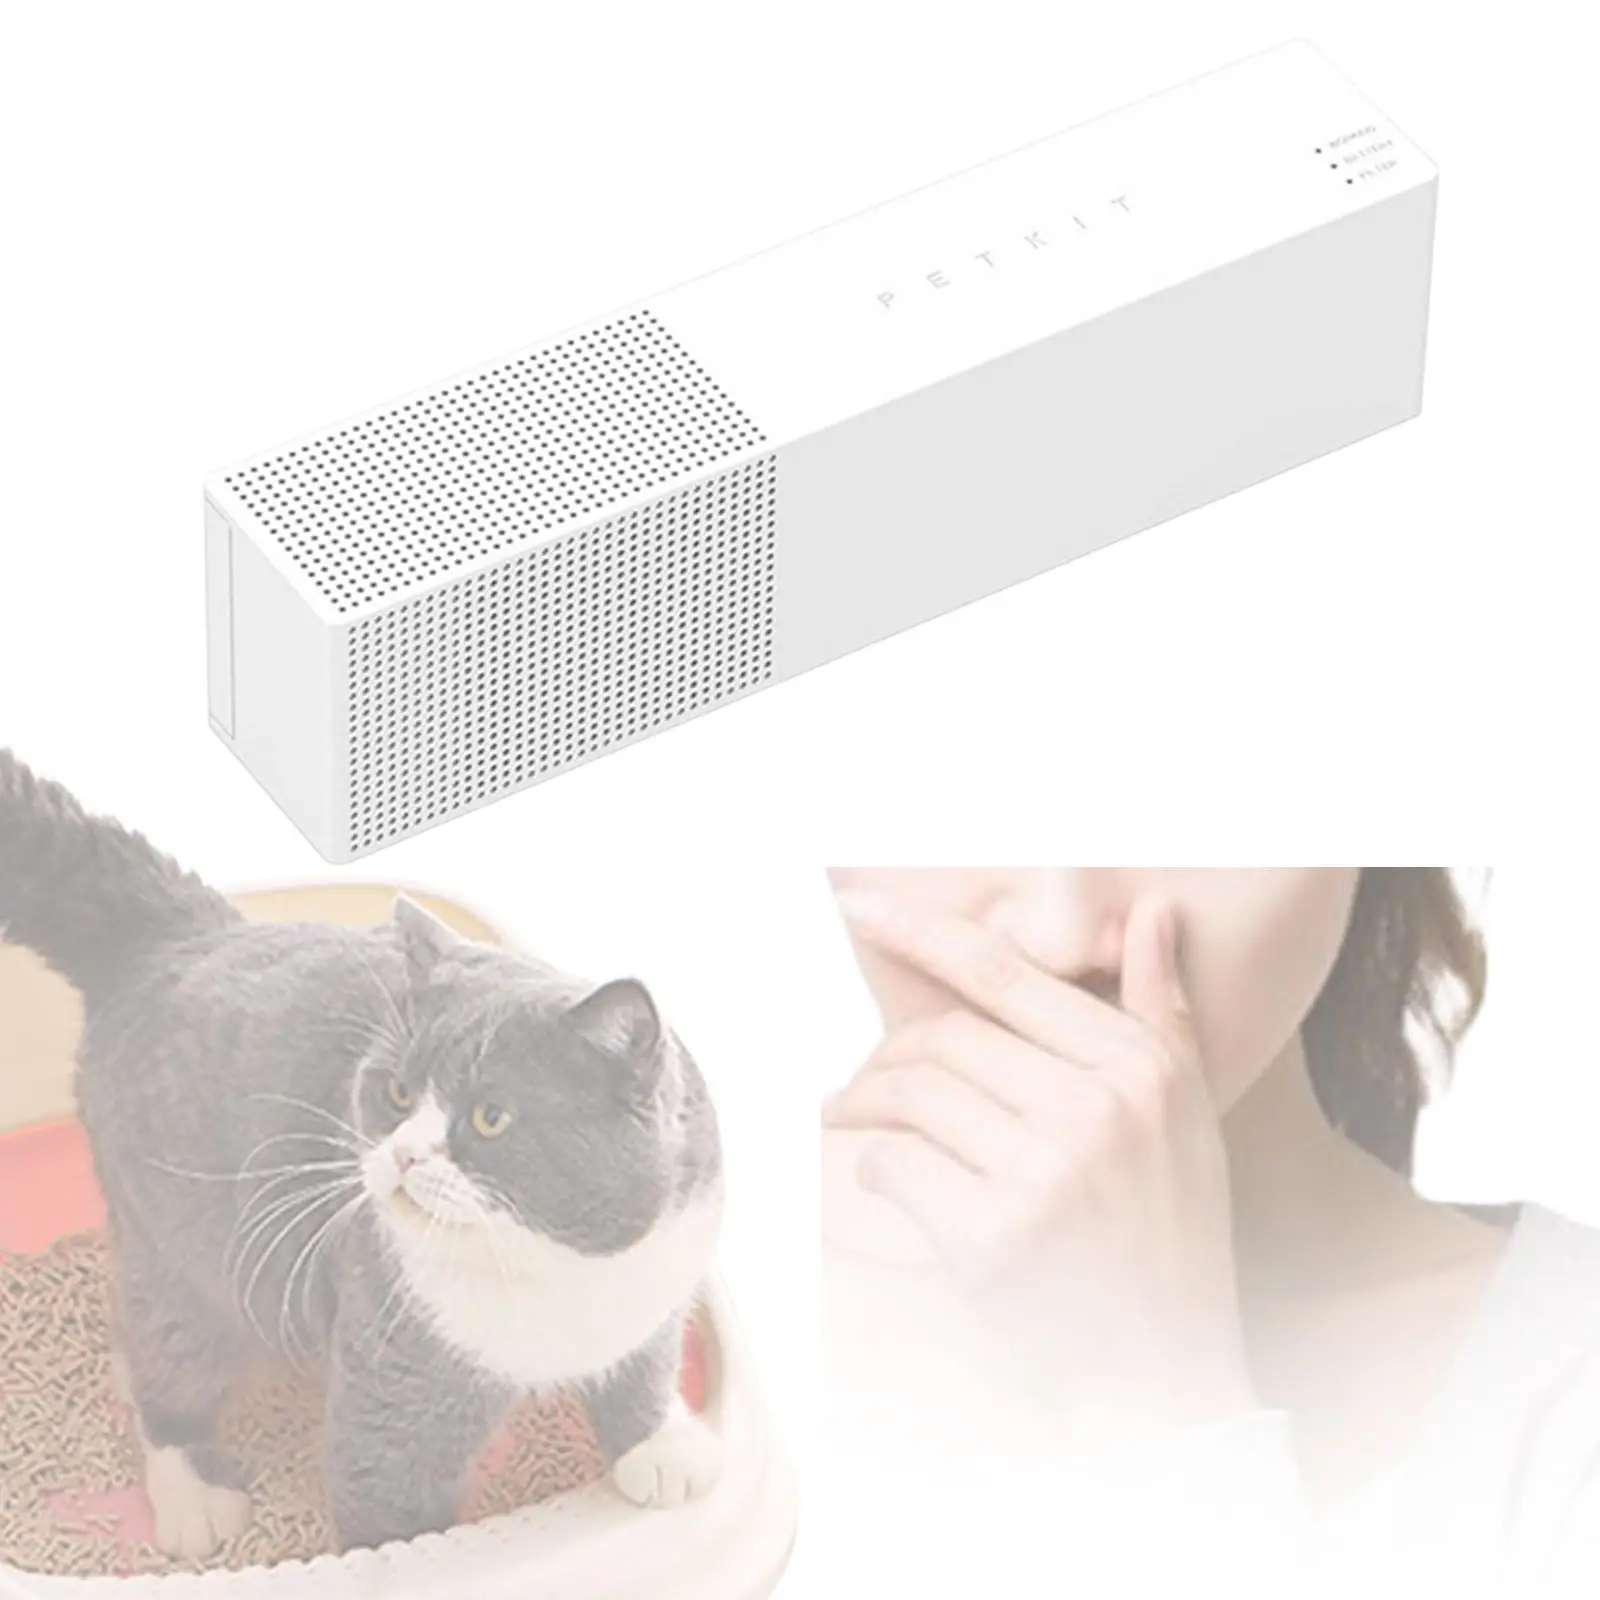 Pets Odor Eliminator Easy to Use Portable Pets Deodorization Wall Mounted Air Purifier for Bathroom Small Area Kitchen